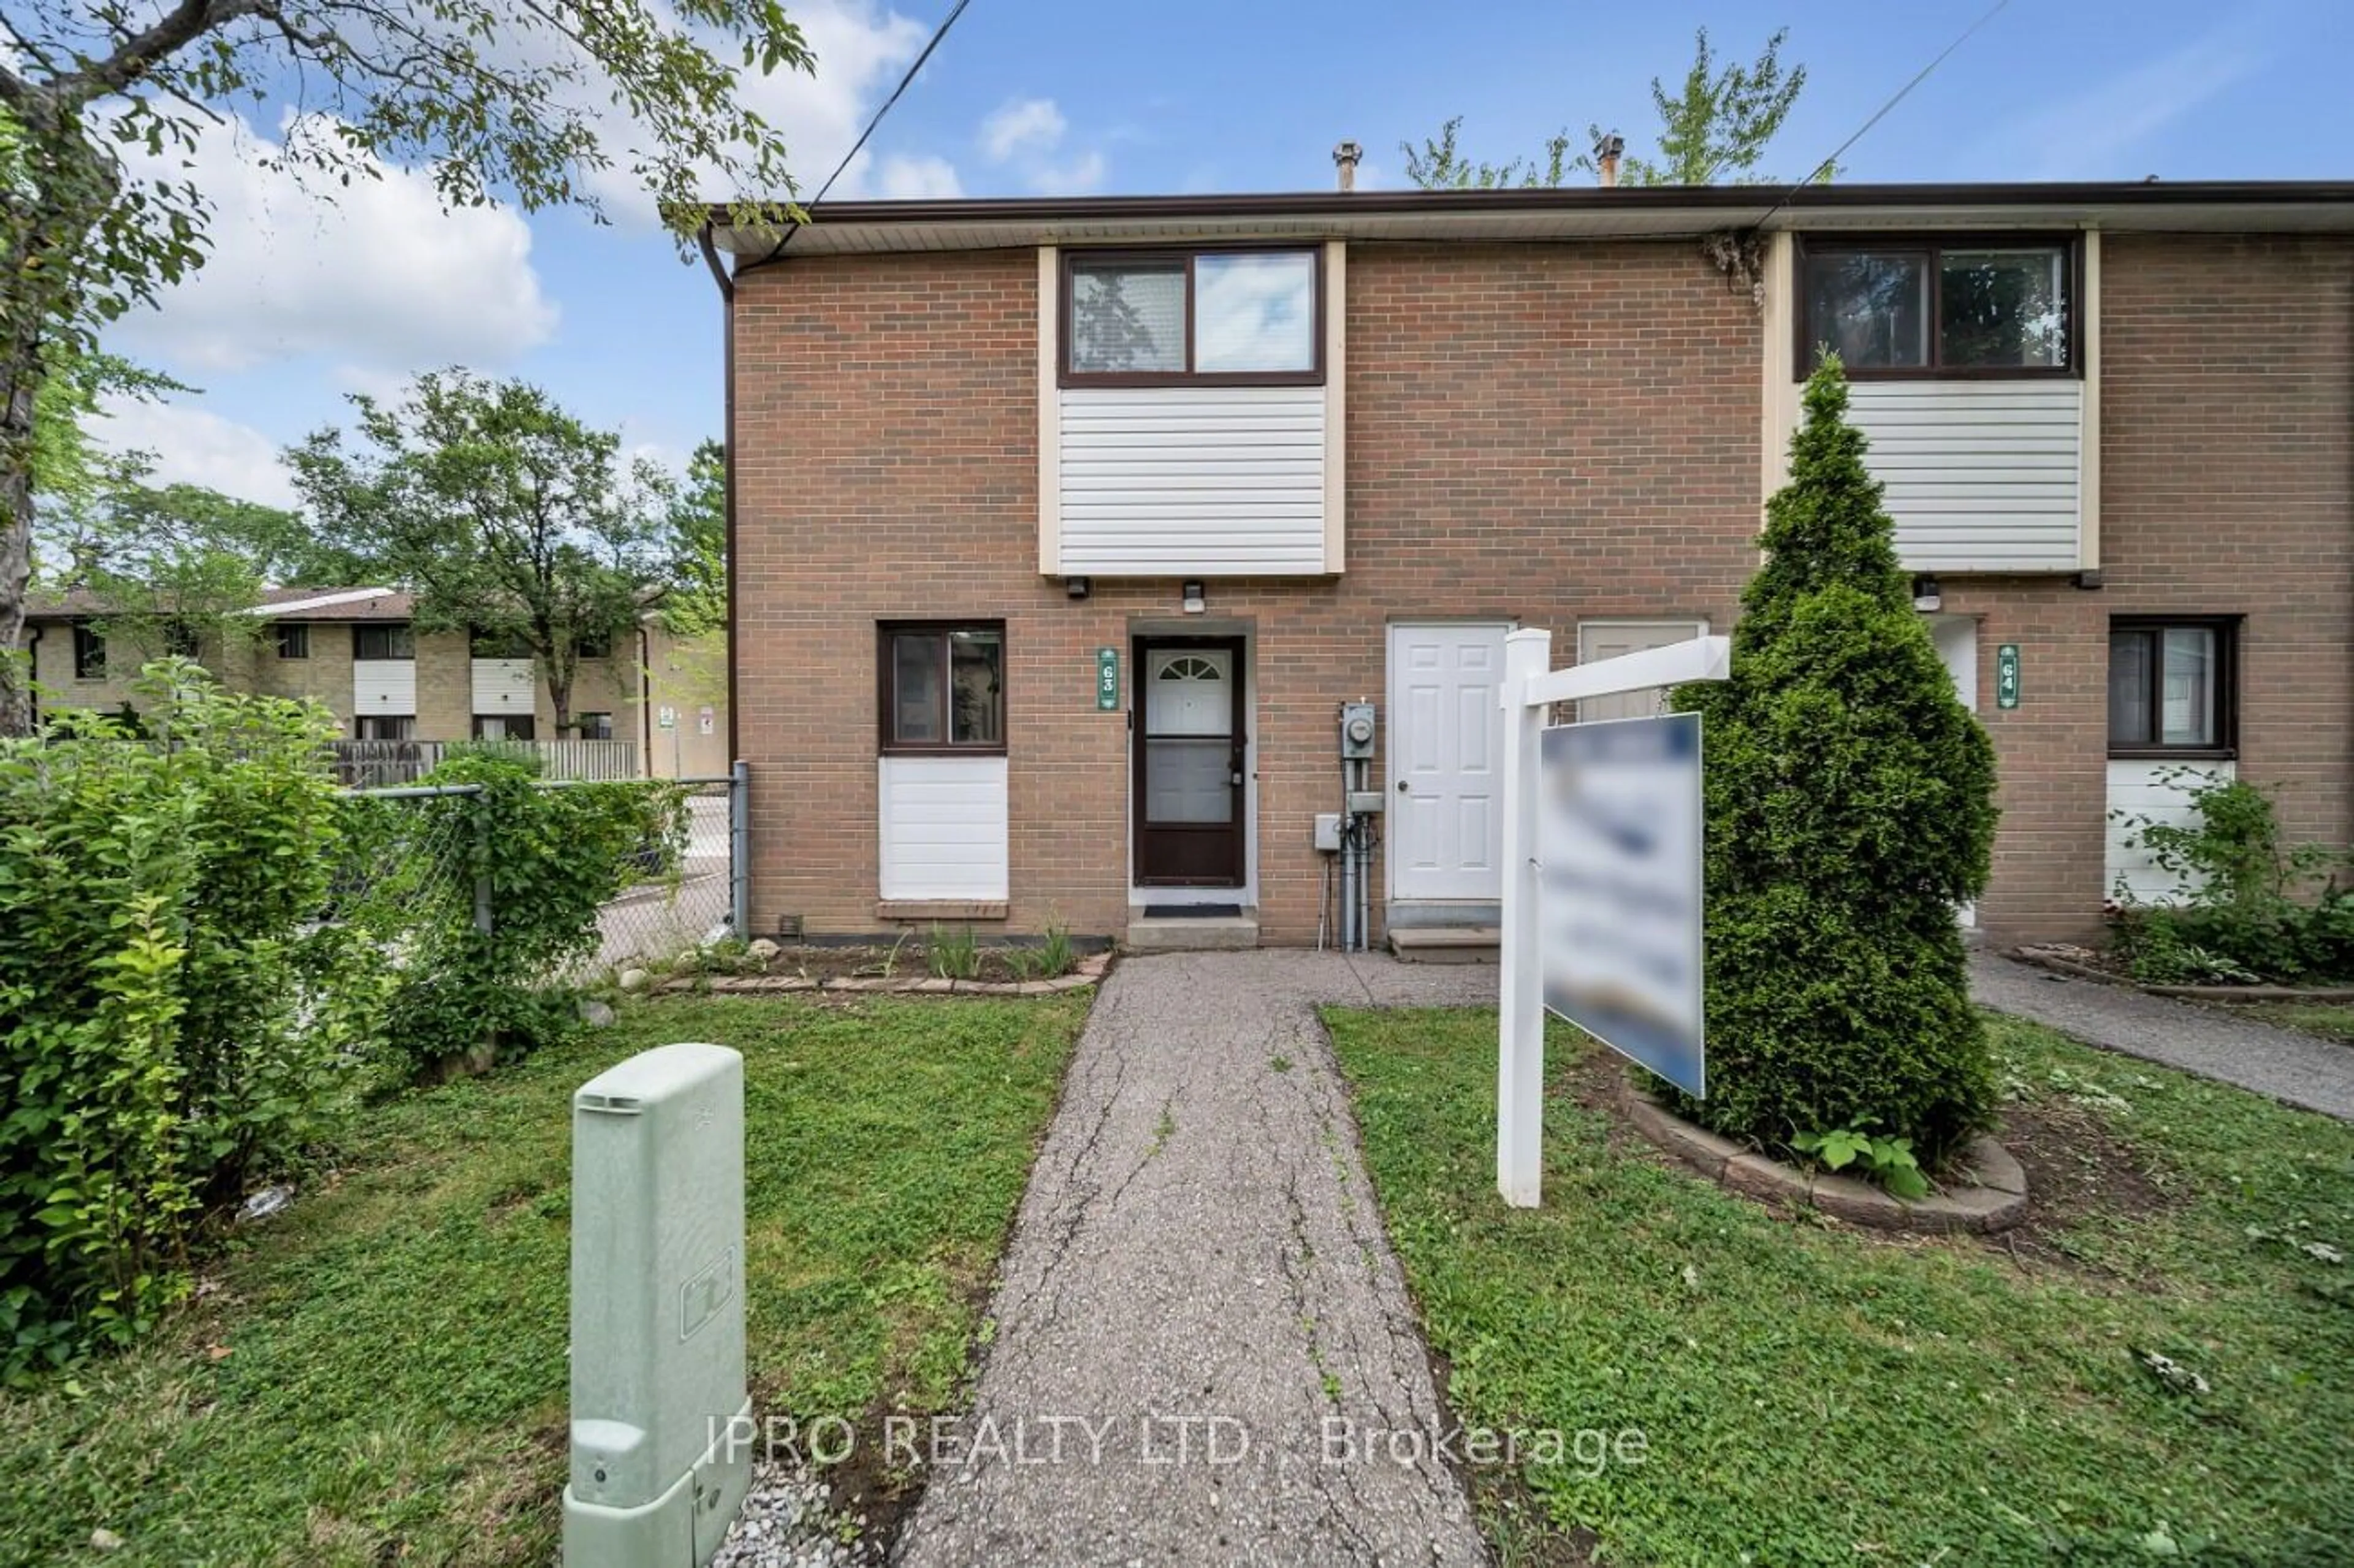 A pic from exterior of the house or condo for 63 Fleetwood Cres #92, Brampton Ontario L6T 2E5